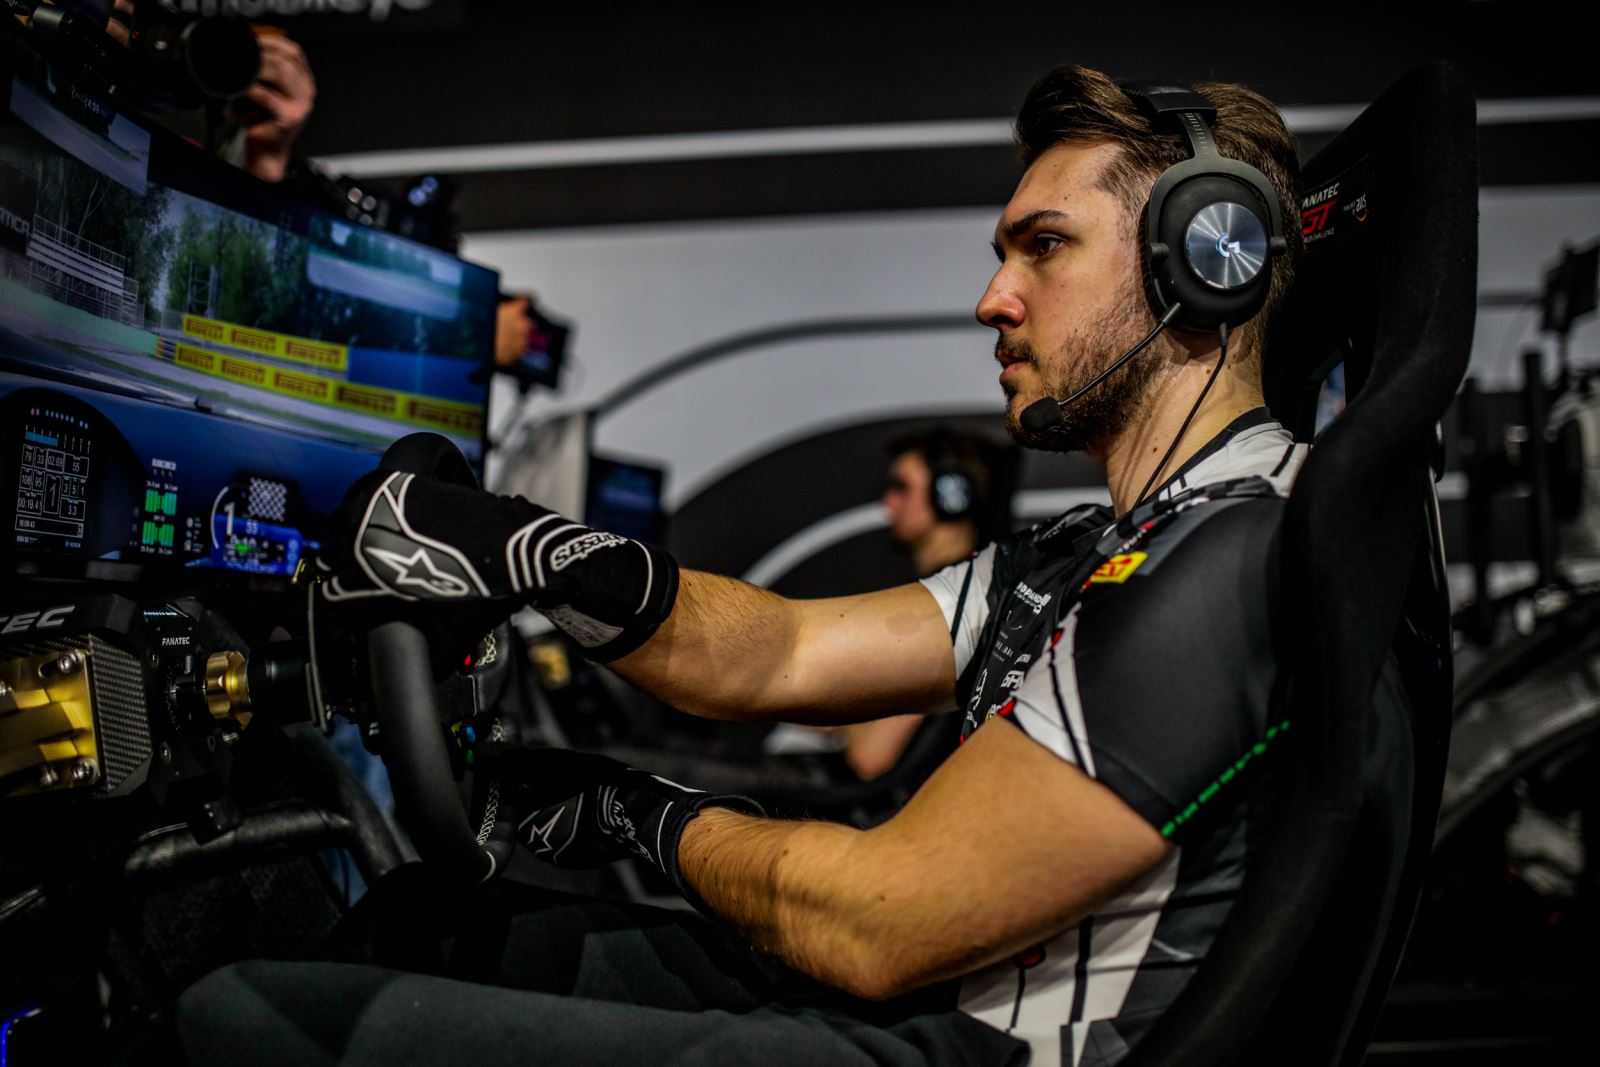 The best of real and virtual collide again as the SRO Esports season heads to Circuit Paul Ricard